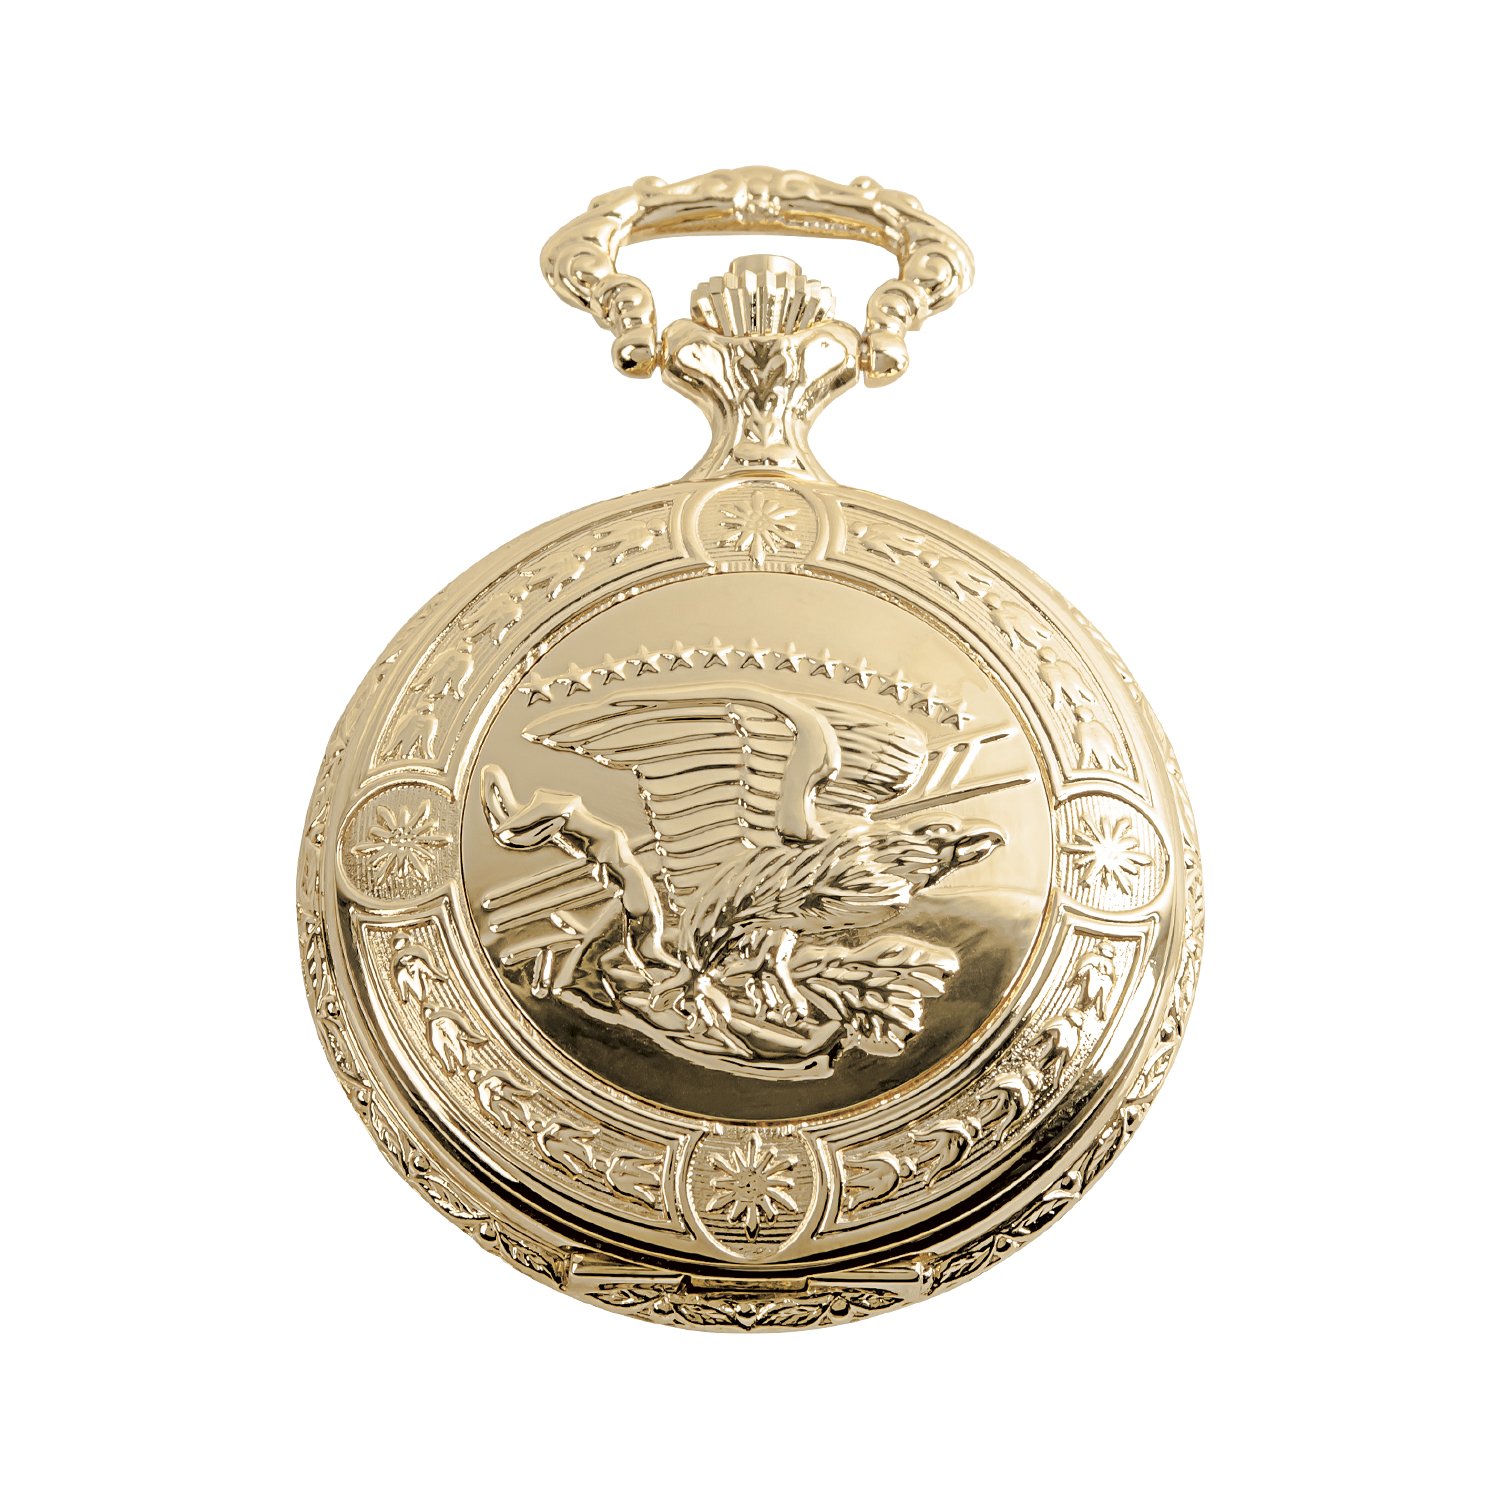 Daniel Steiger Flying Eagle Luxury Vintage Hunter Pocket Watch with Chain - Hand-Made Hunter Pocket Watch - 18k Gold Finish - Engraved Flying Eagle Design - White Dial with Black Roman Numerals